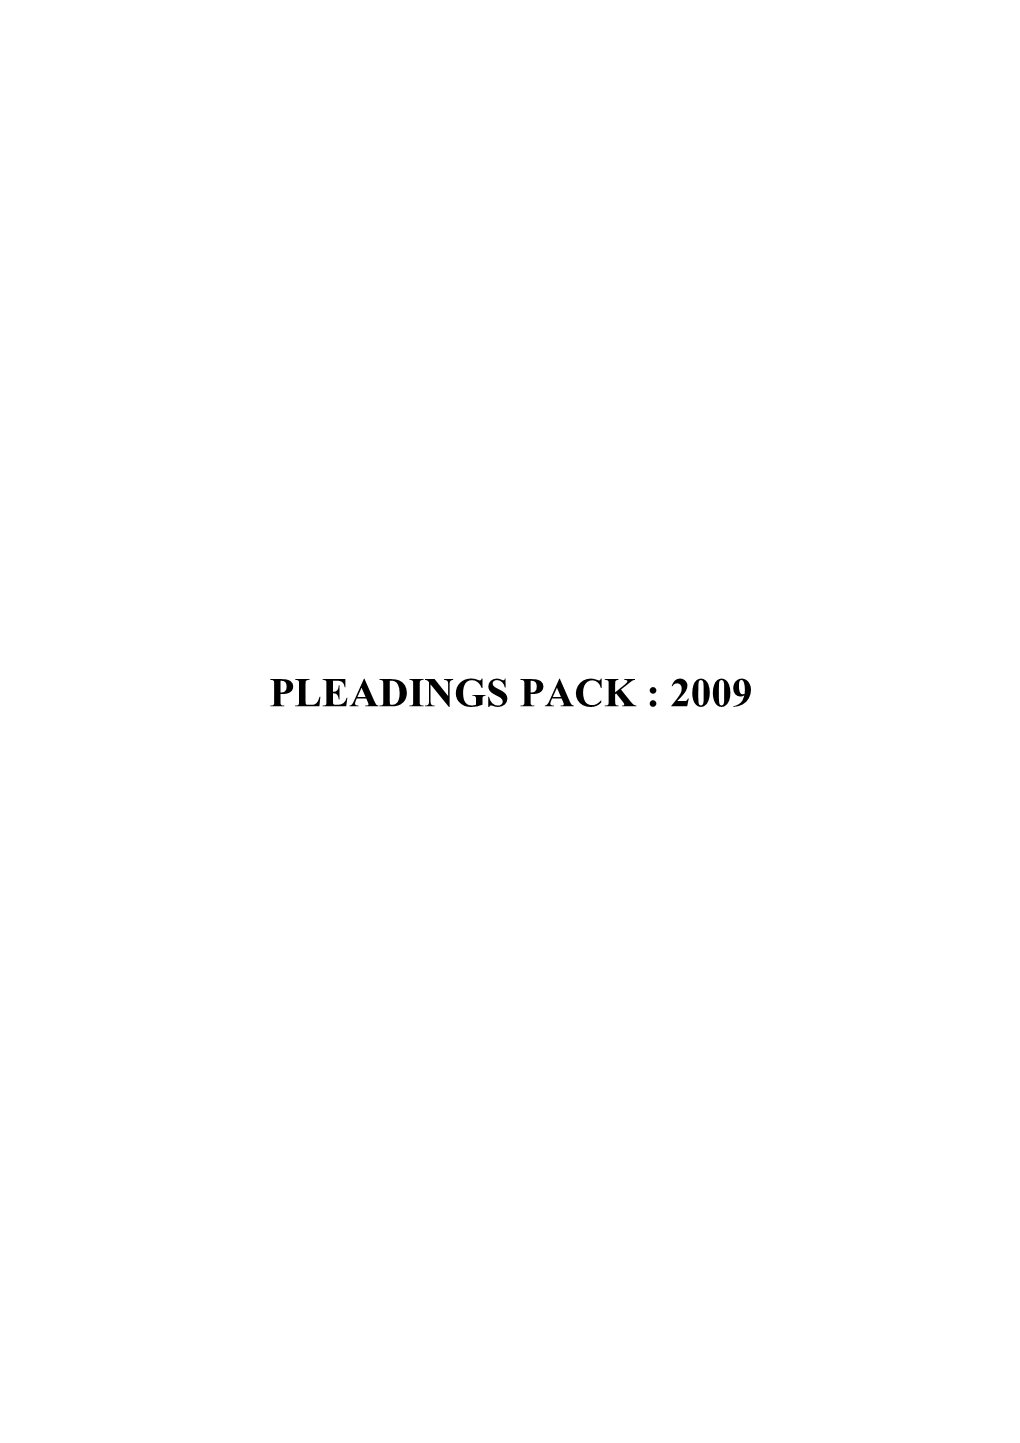 A.Introduction to the Drafting of Pleadings 5 Case Study: Facts 11